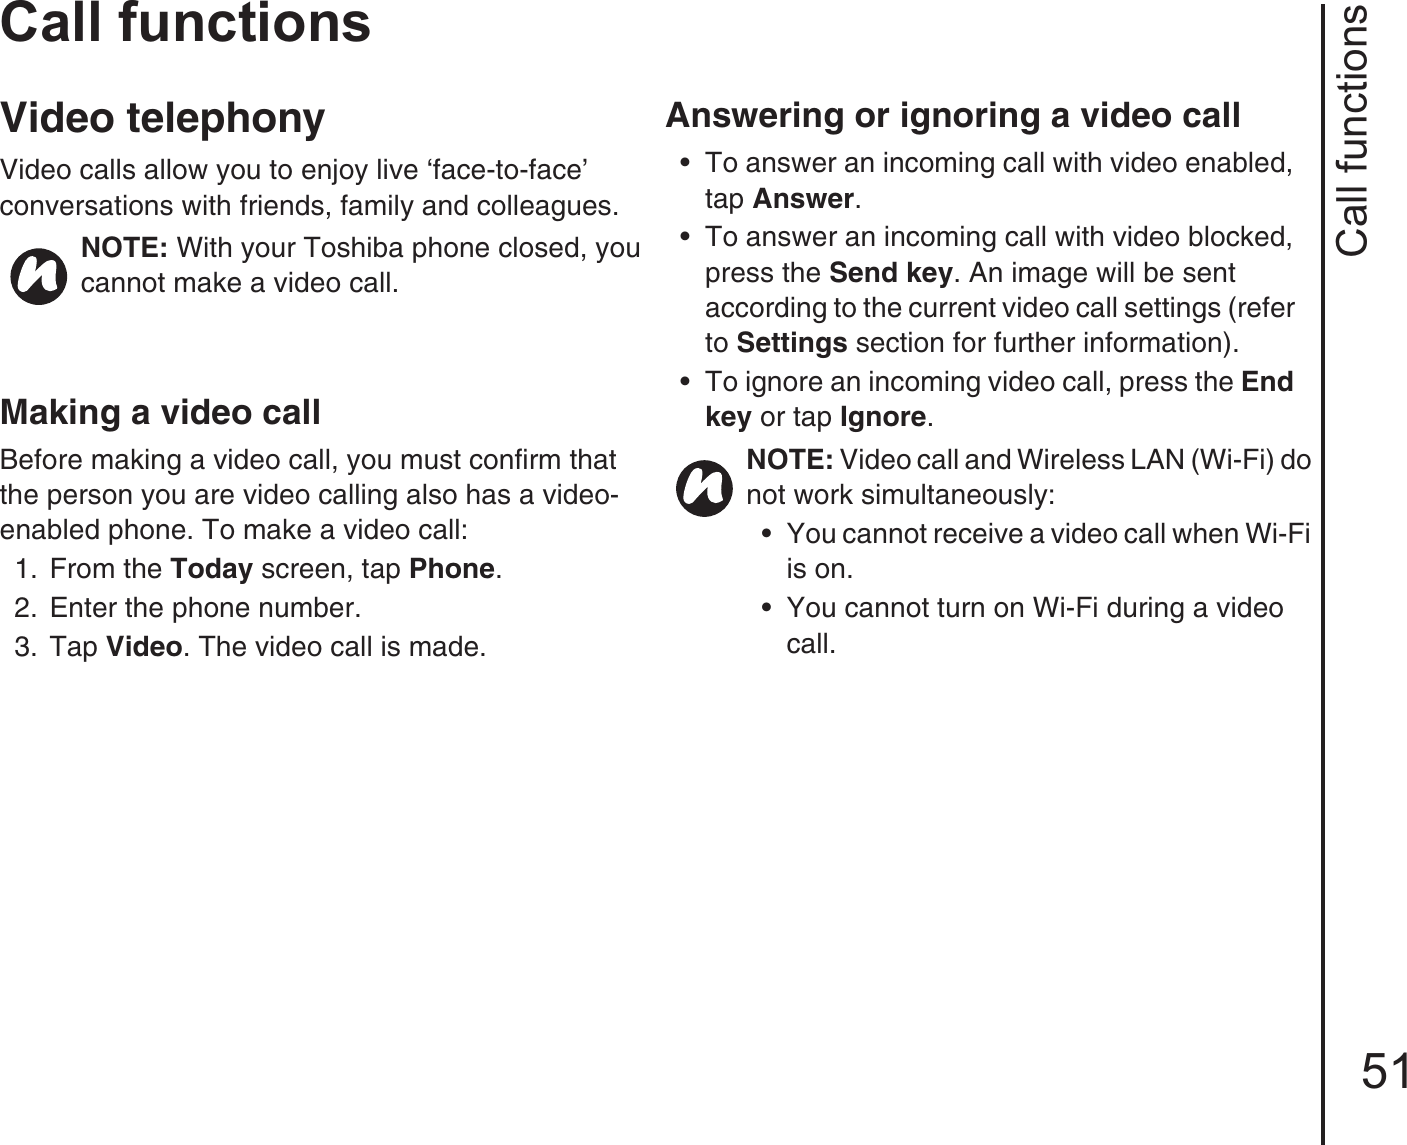 Call functions51Call functionsVideo telephonyVideo calls allow you to enjoy live ‘face-to-face’   conversations with friends, family and colleagues.Making a video callBefore making a video call, you must confirm that the person you are video calling also has a video-enabled phone. To make a video call:1.  From the Today screen, tap Phone. 2.  Enter the phone number.3.  Tap Video. The video call is made. Answering or ignoring a video call • To answer an incoming call with video enabled, tap Answer.• To answer an incoming call with video blocked, press the Send key. An image will be sent according to the current video call settings (refer to Settings section for further information).• To ignore an incoming video call, press the End key or tap Ignore.NOTE: With your Toshiba phone closed, you cannot make a video call.NOTE: Video call and Wireless LAN (Wi-Fi) do not work simultaneously:• You cannot receive a video call when Wi-Fi is on.• You cannot turn on Wi-Fi during a video call.